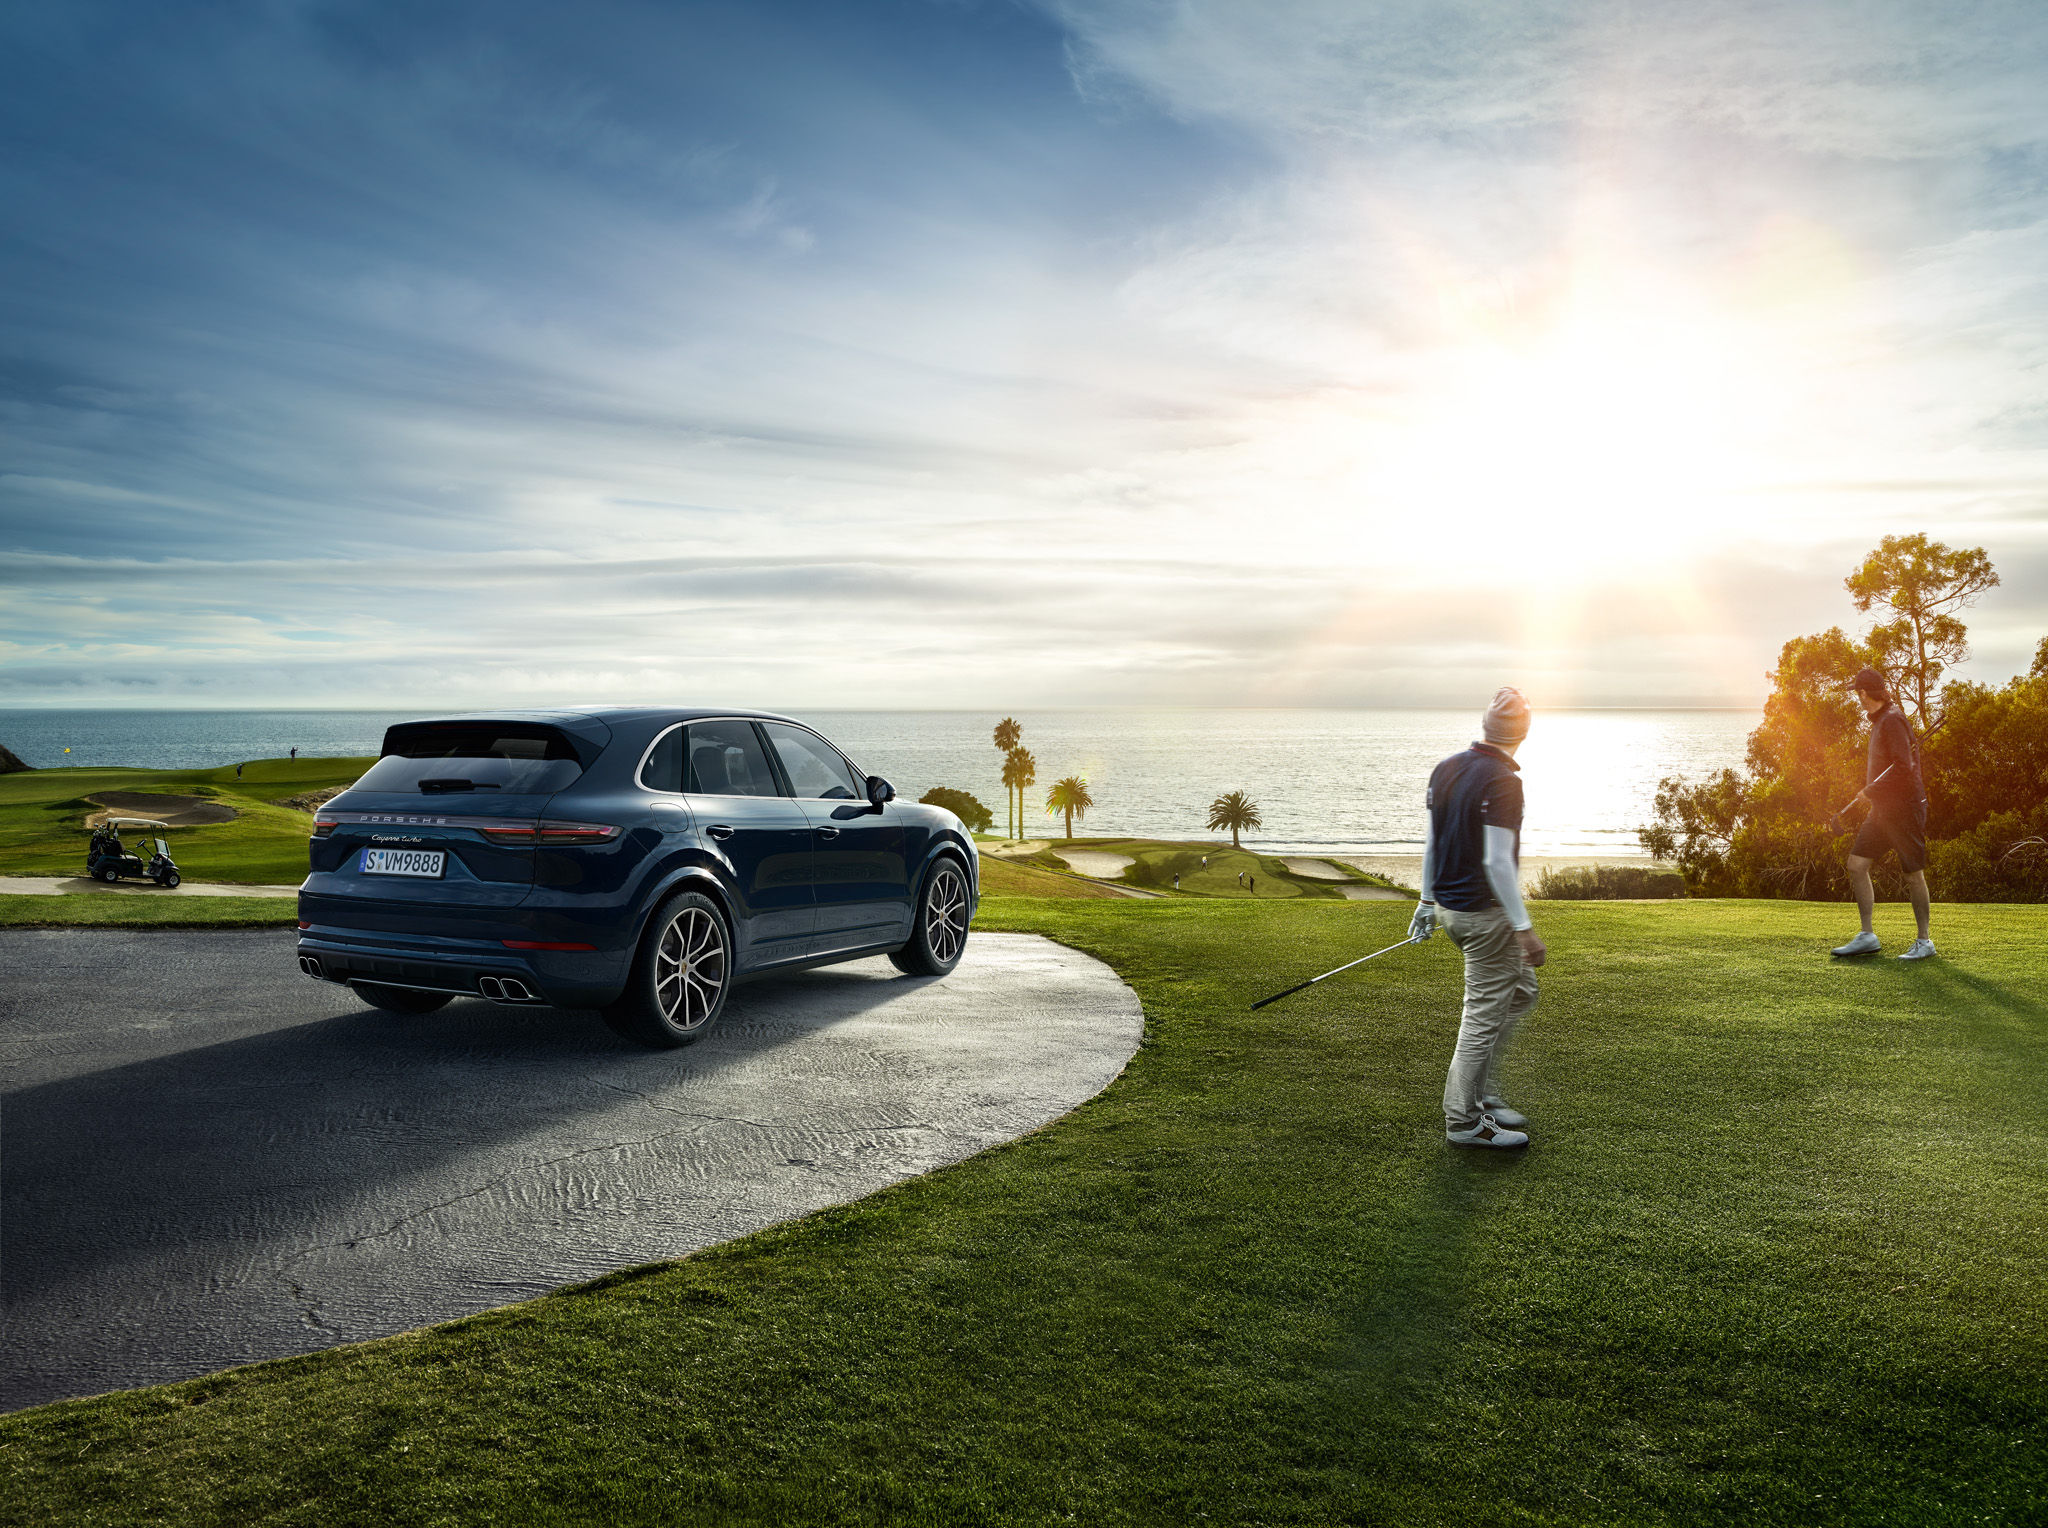 The new Porsche Cayenne is now available in Singapore